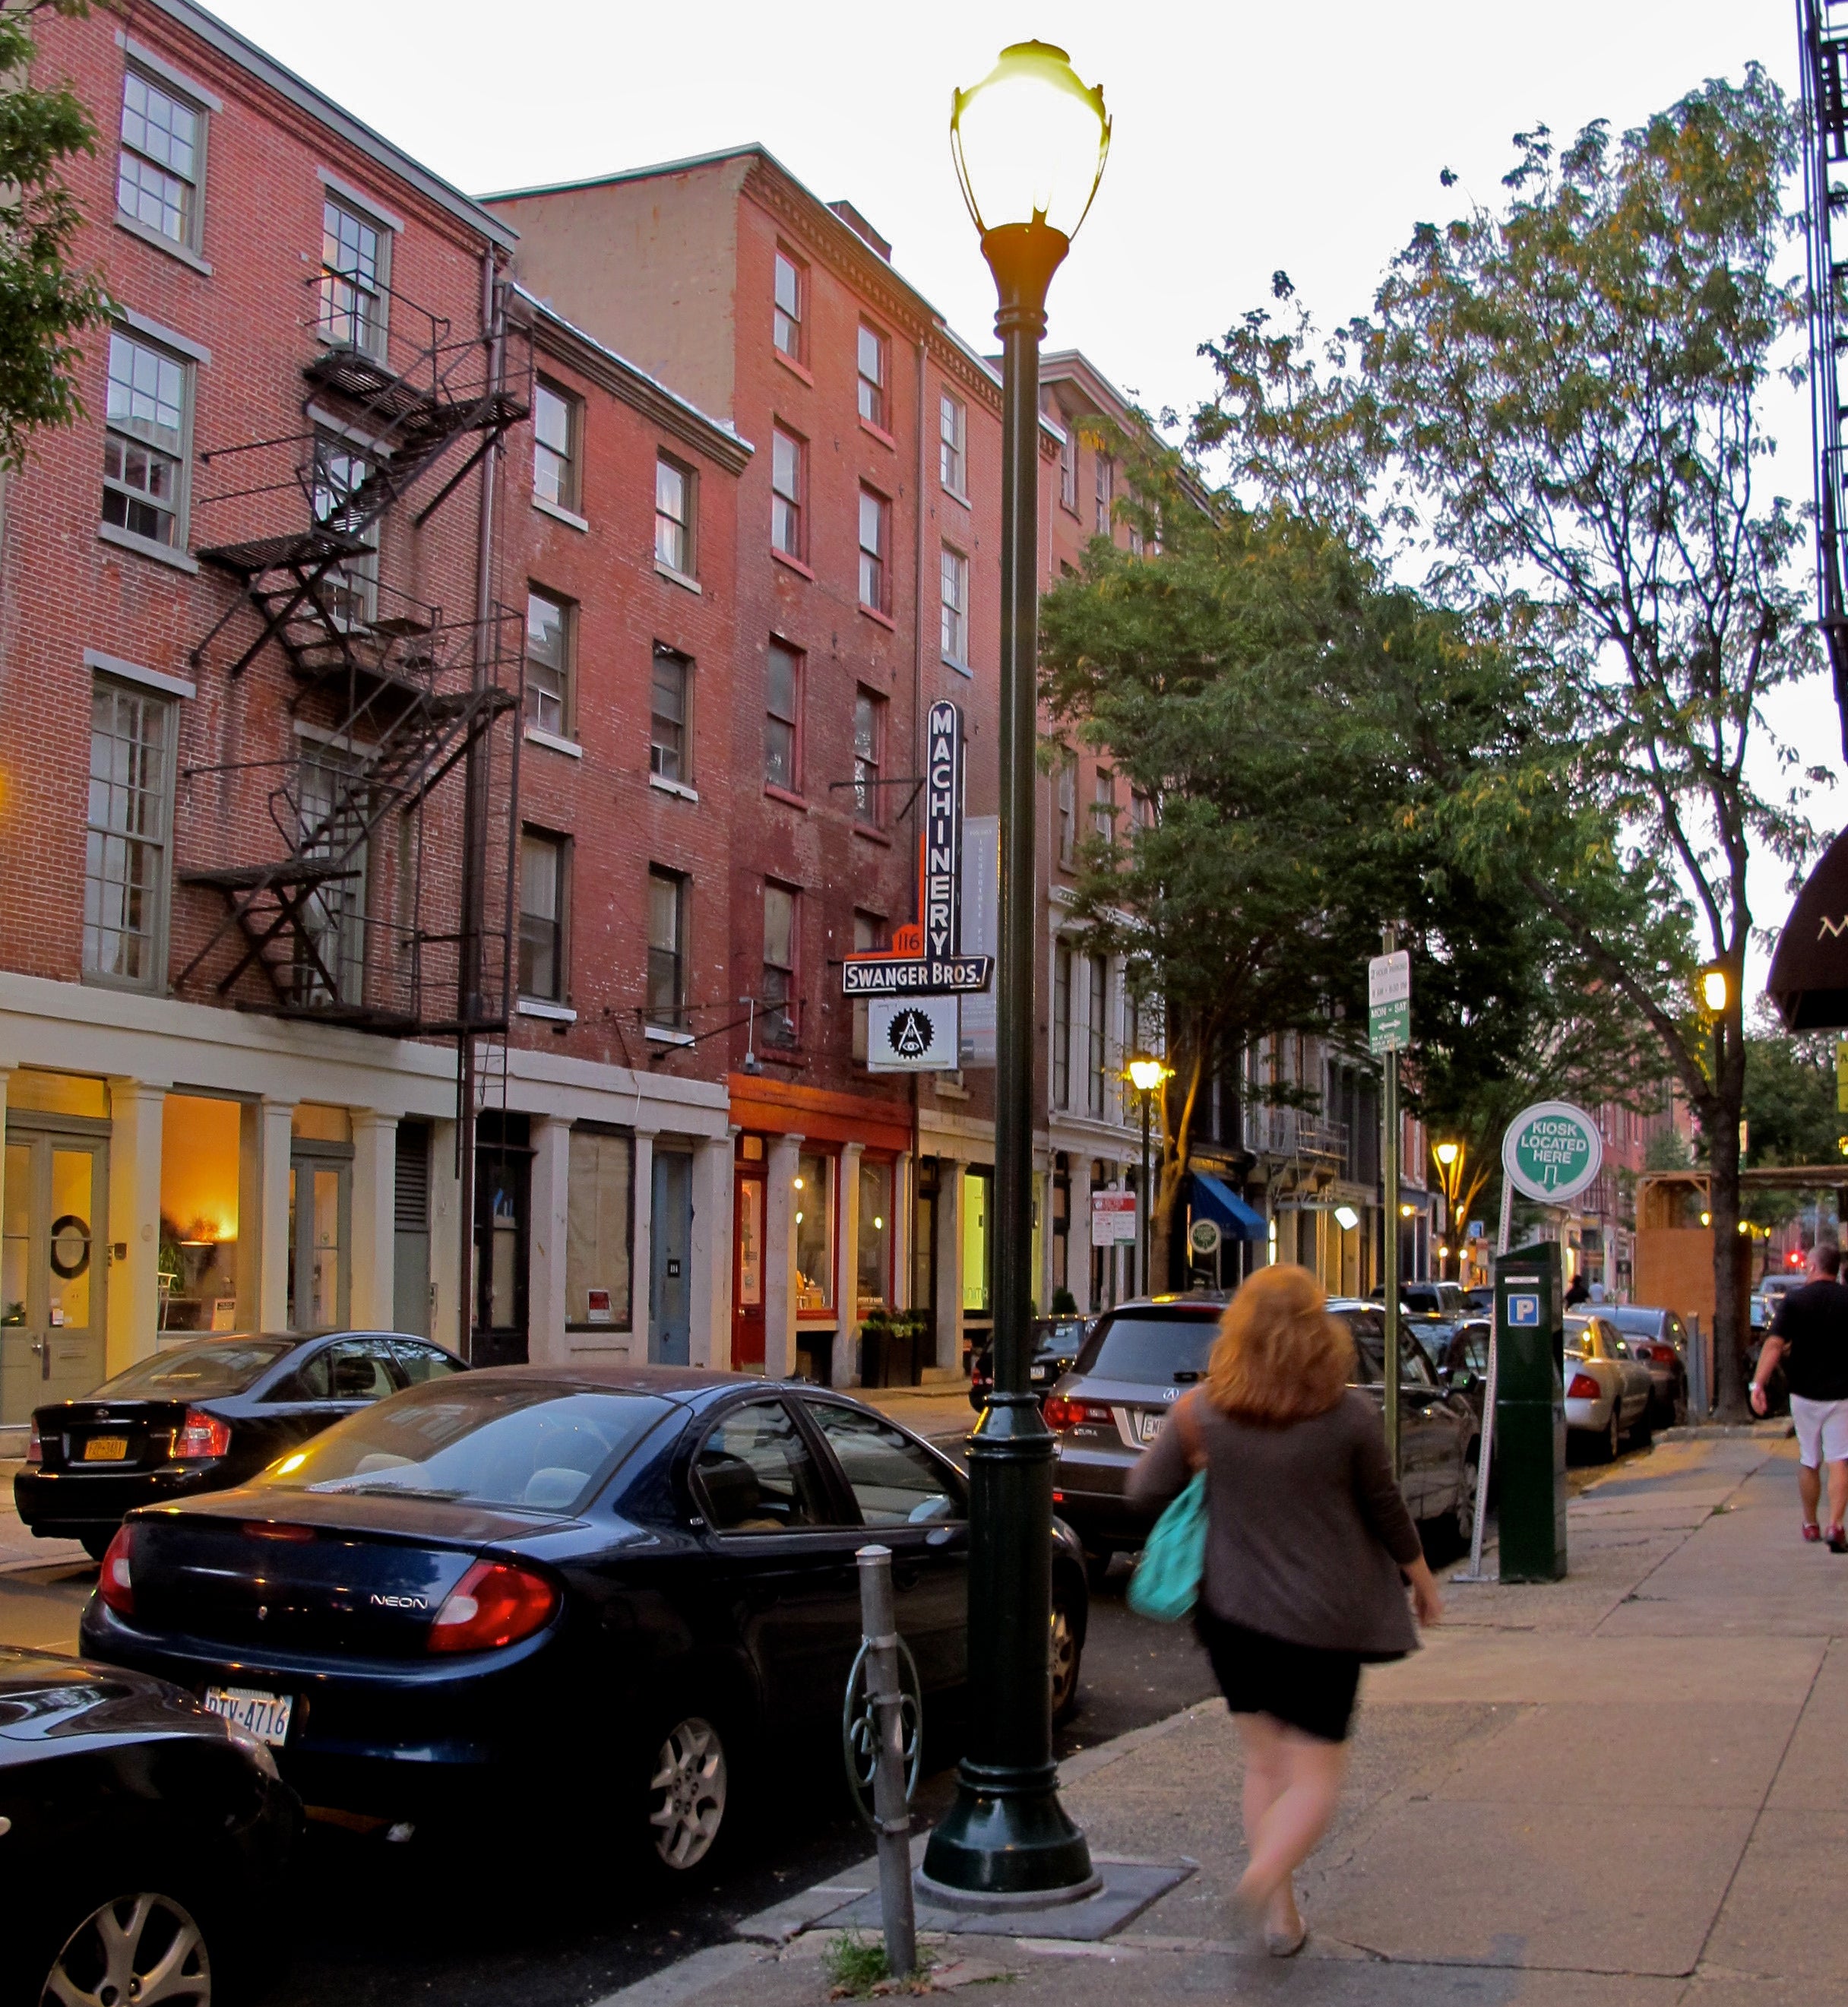 33 new pedestrian-scale street lights were recently installed along North 3rd Street in Old City.